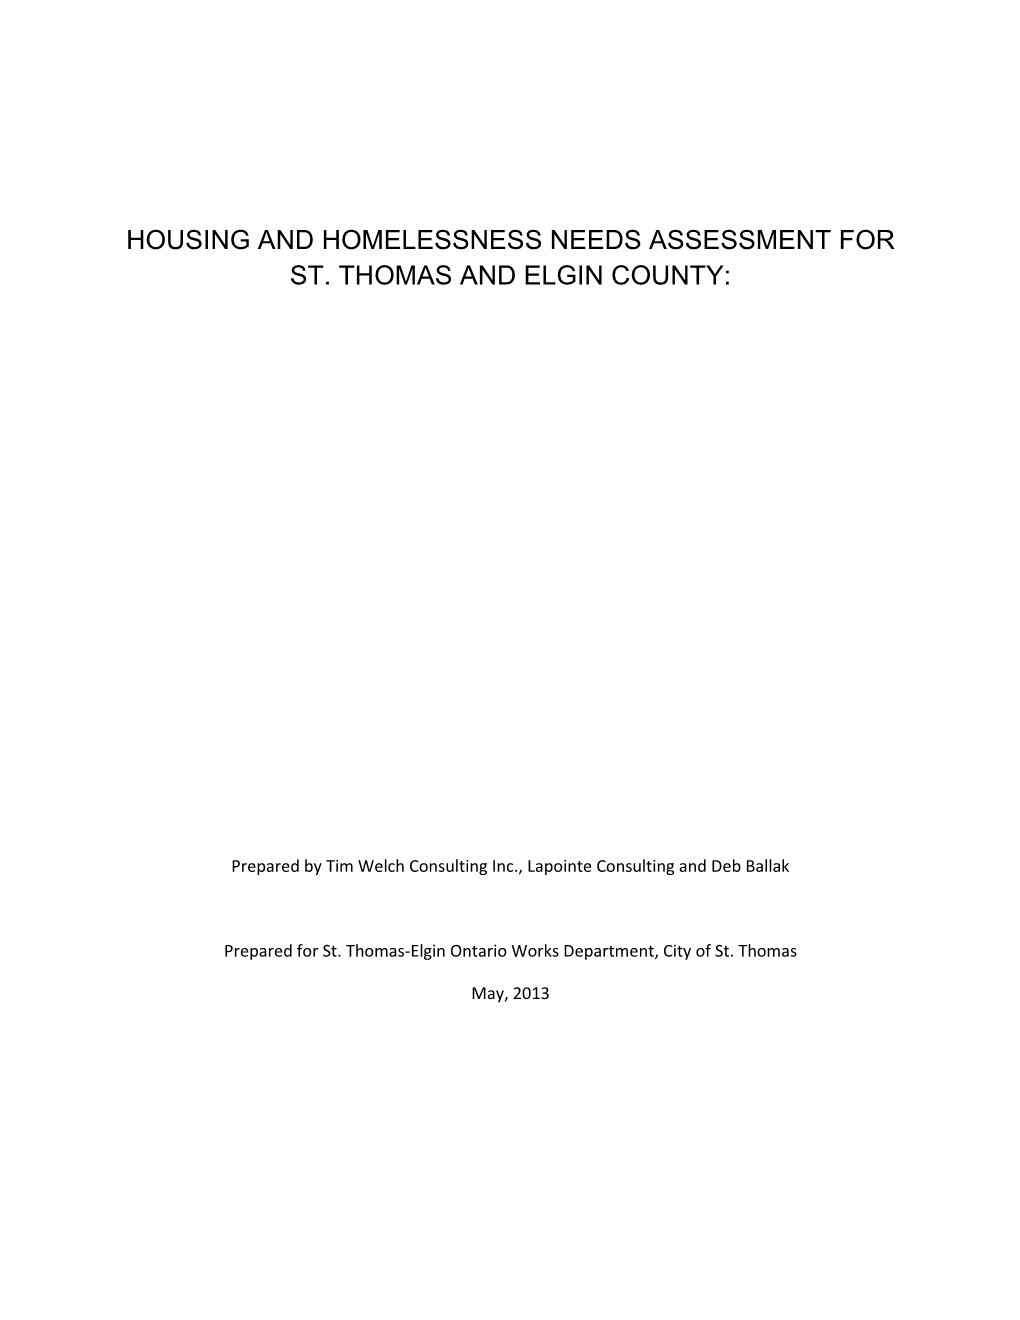 Housing and Homelessness Needs Assessment for St. Thomas and Elgin County